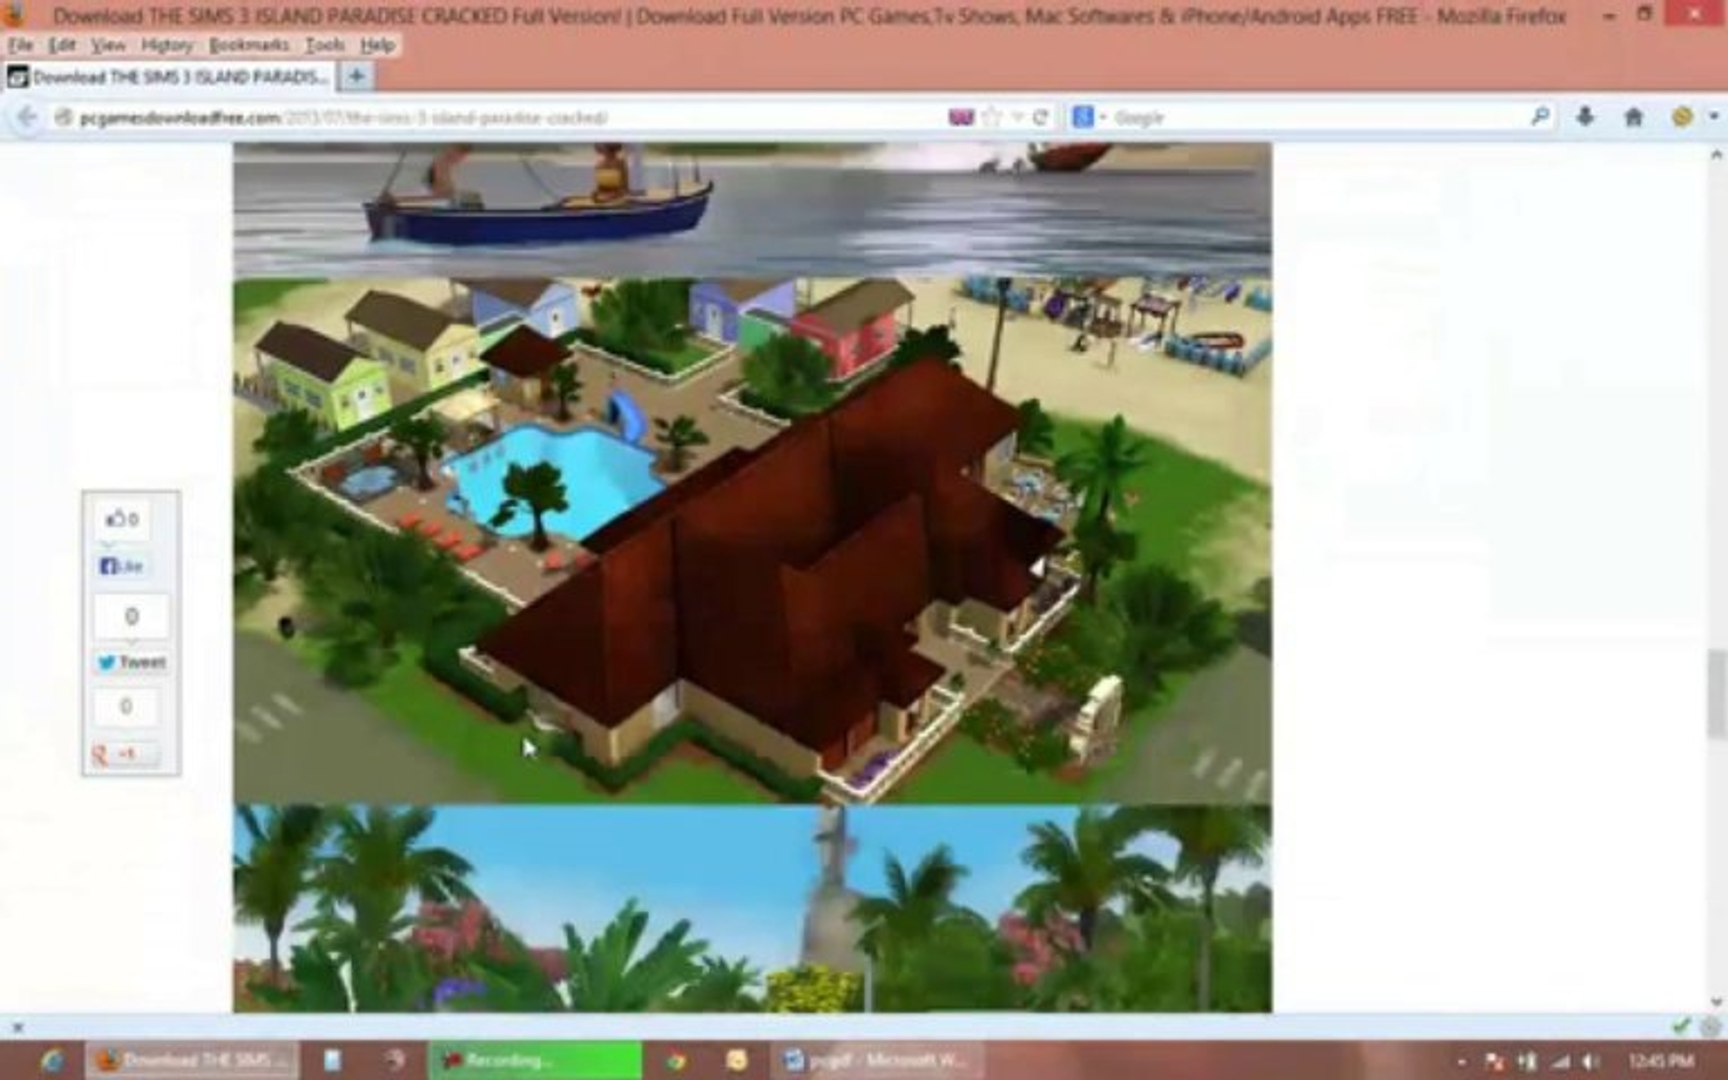 How To Download The Sims 3 For Free On PC